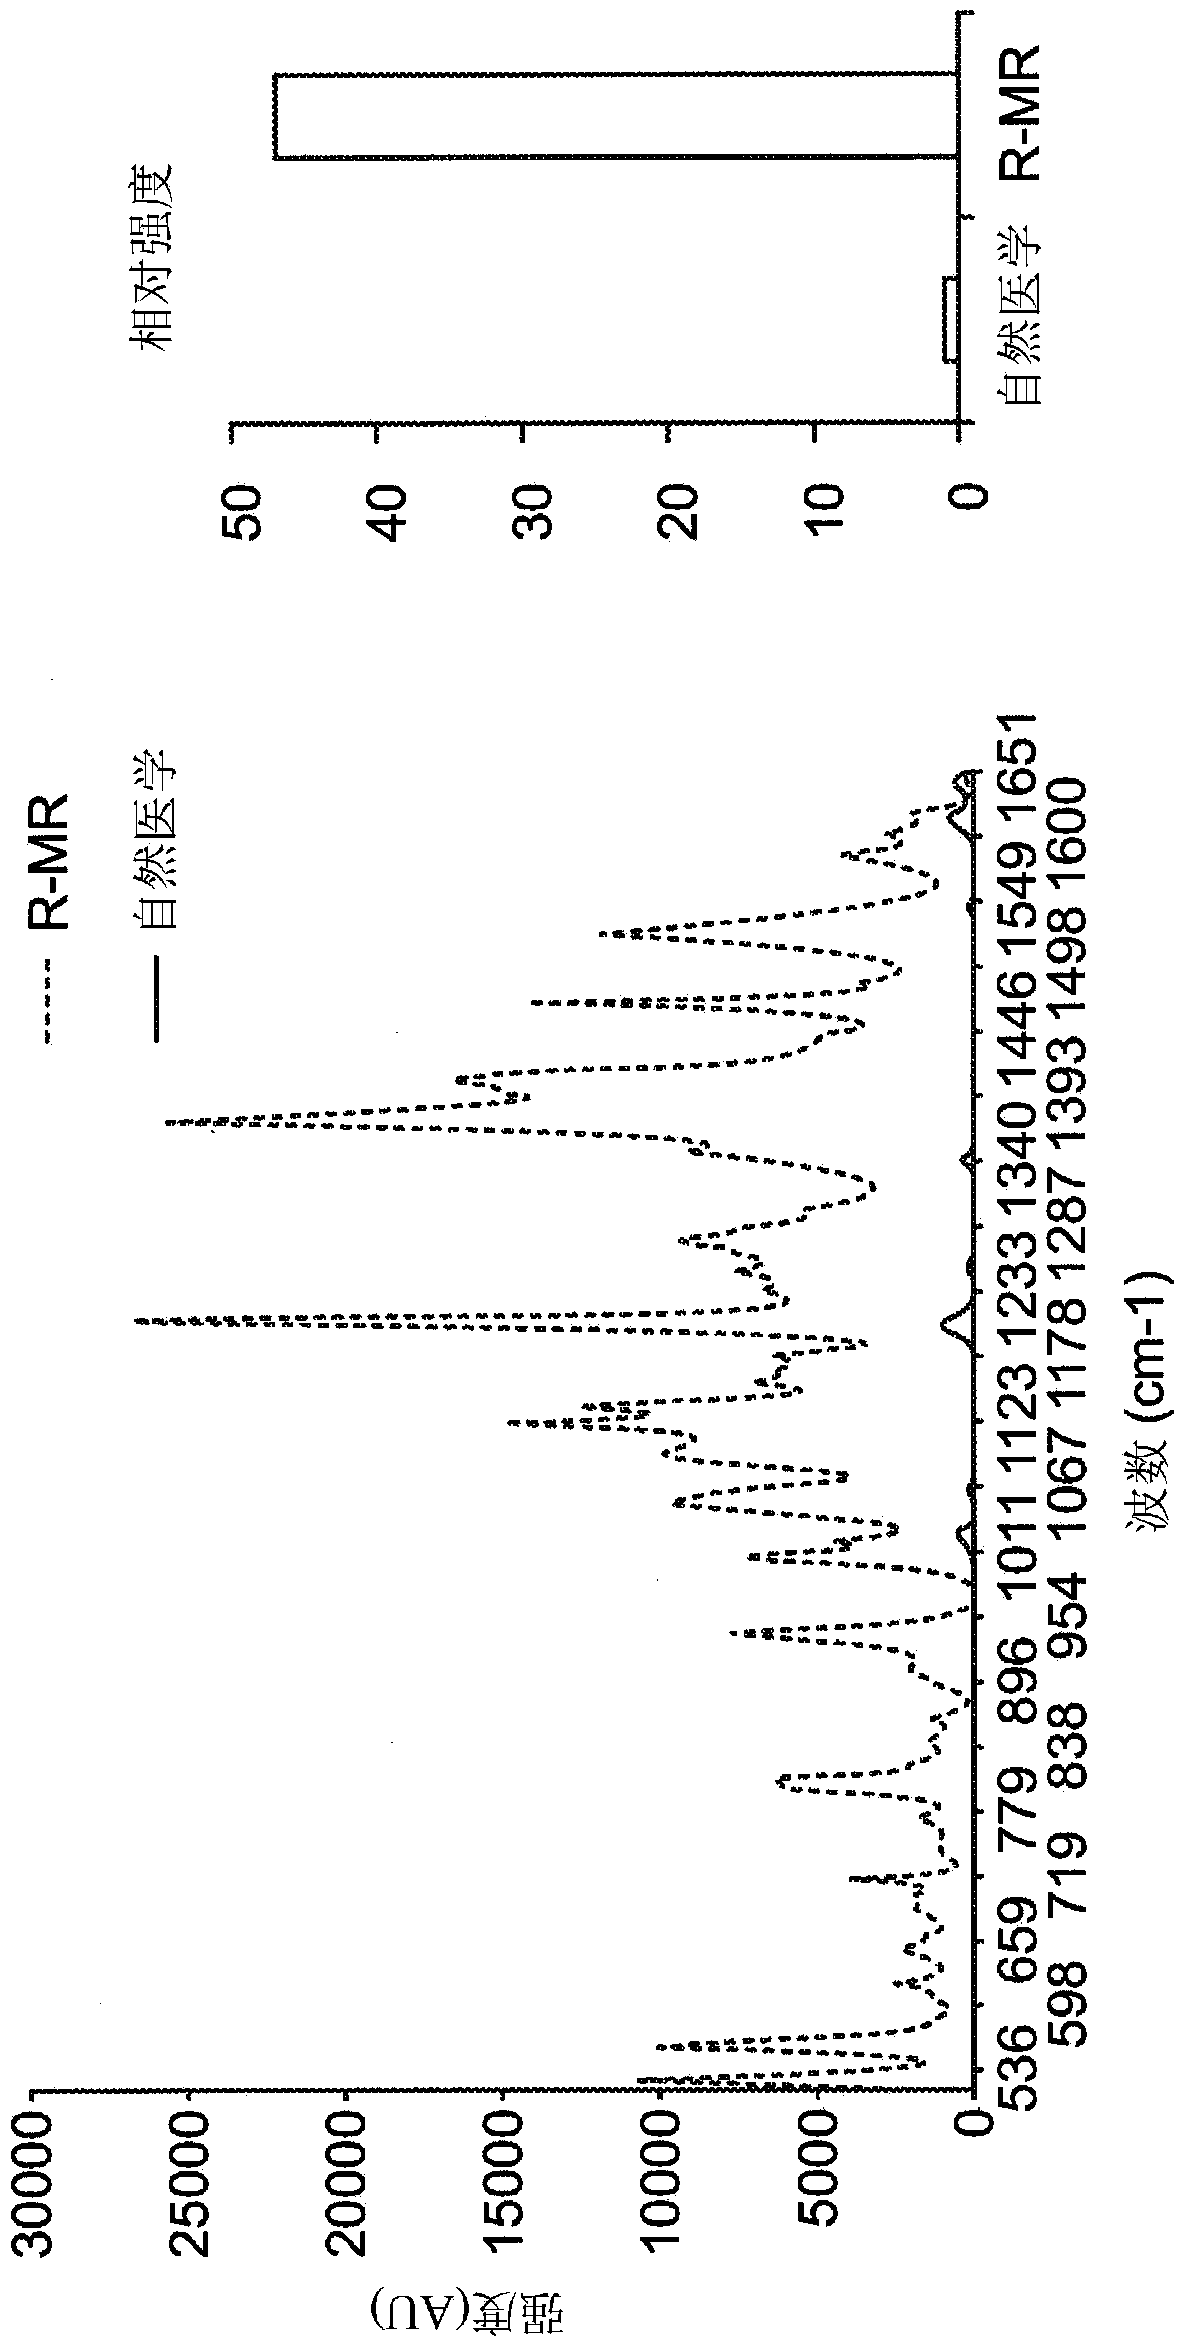 Multimodal particles, methods and uses thereof